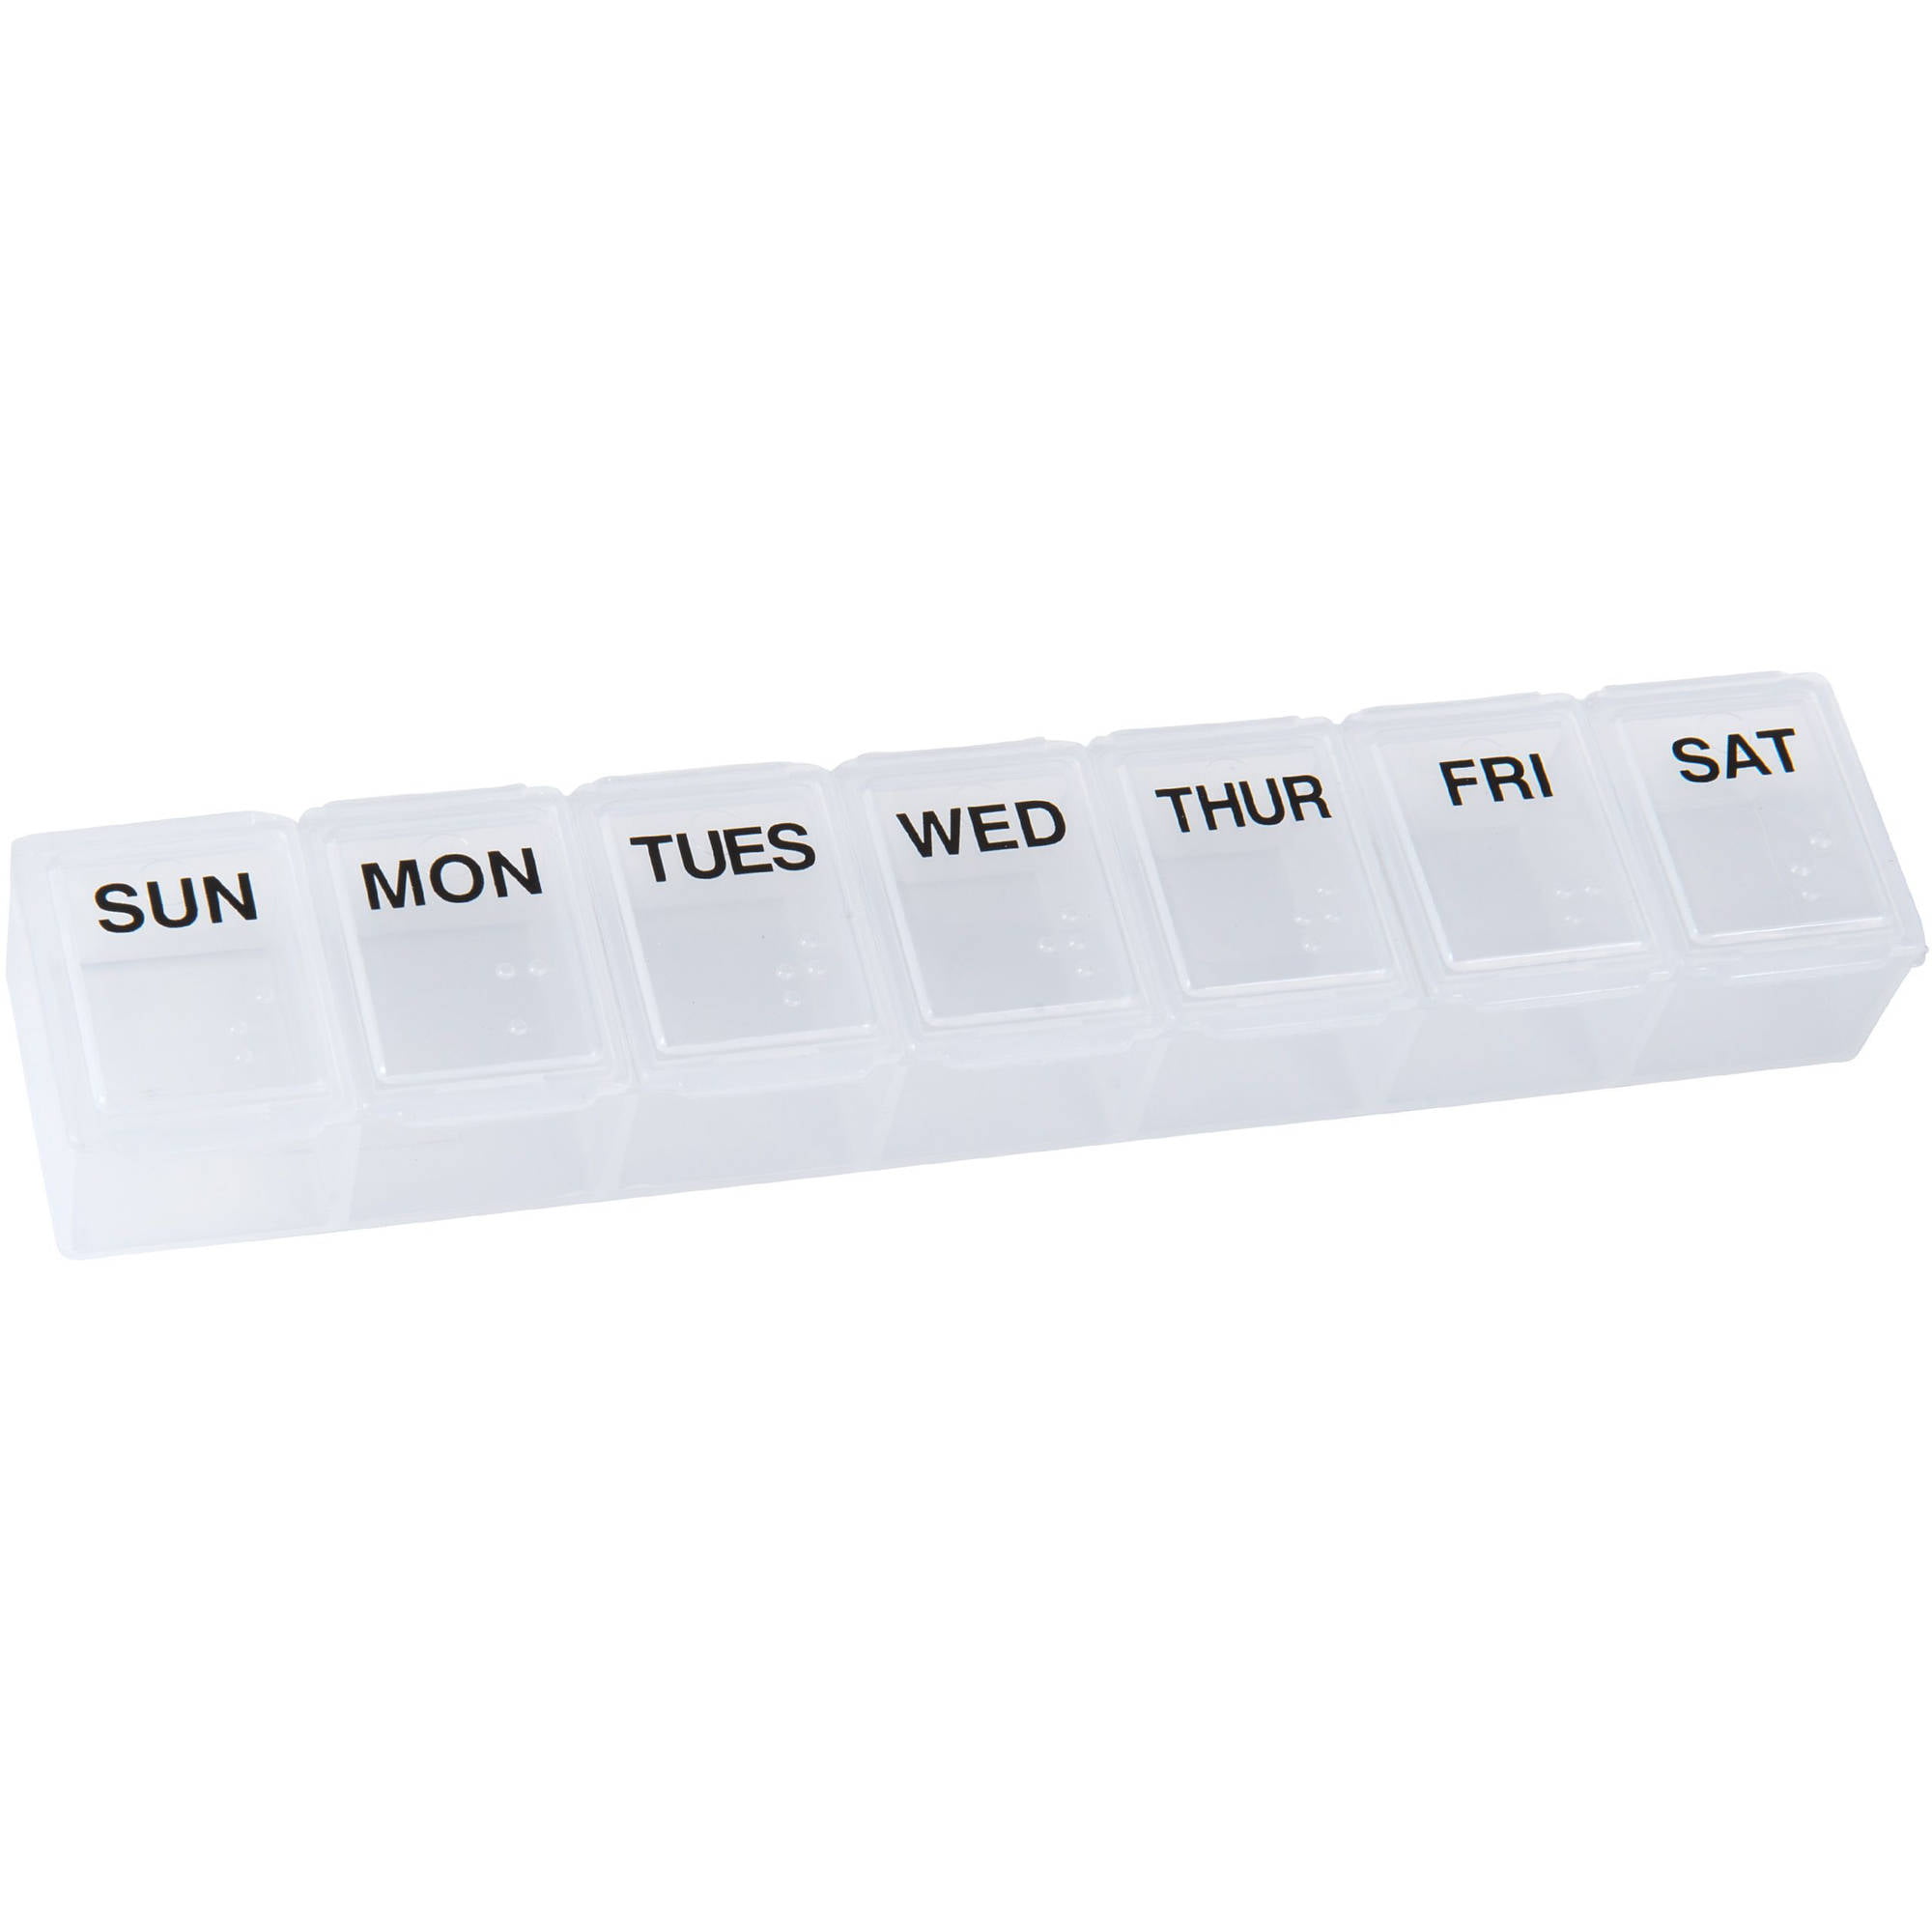 Water Bottle & Portable Pill Organizer, 7 Day Pill Case + 8oz Cup